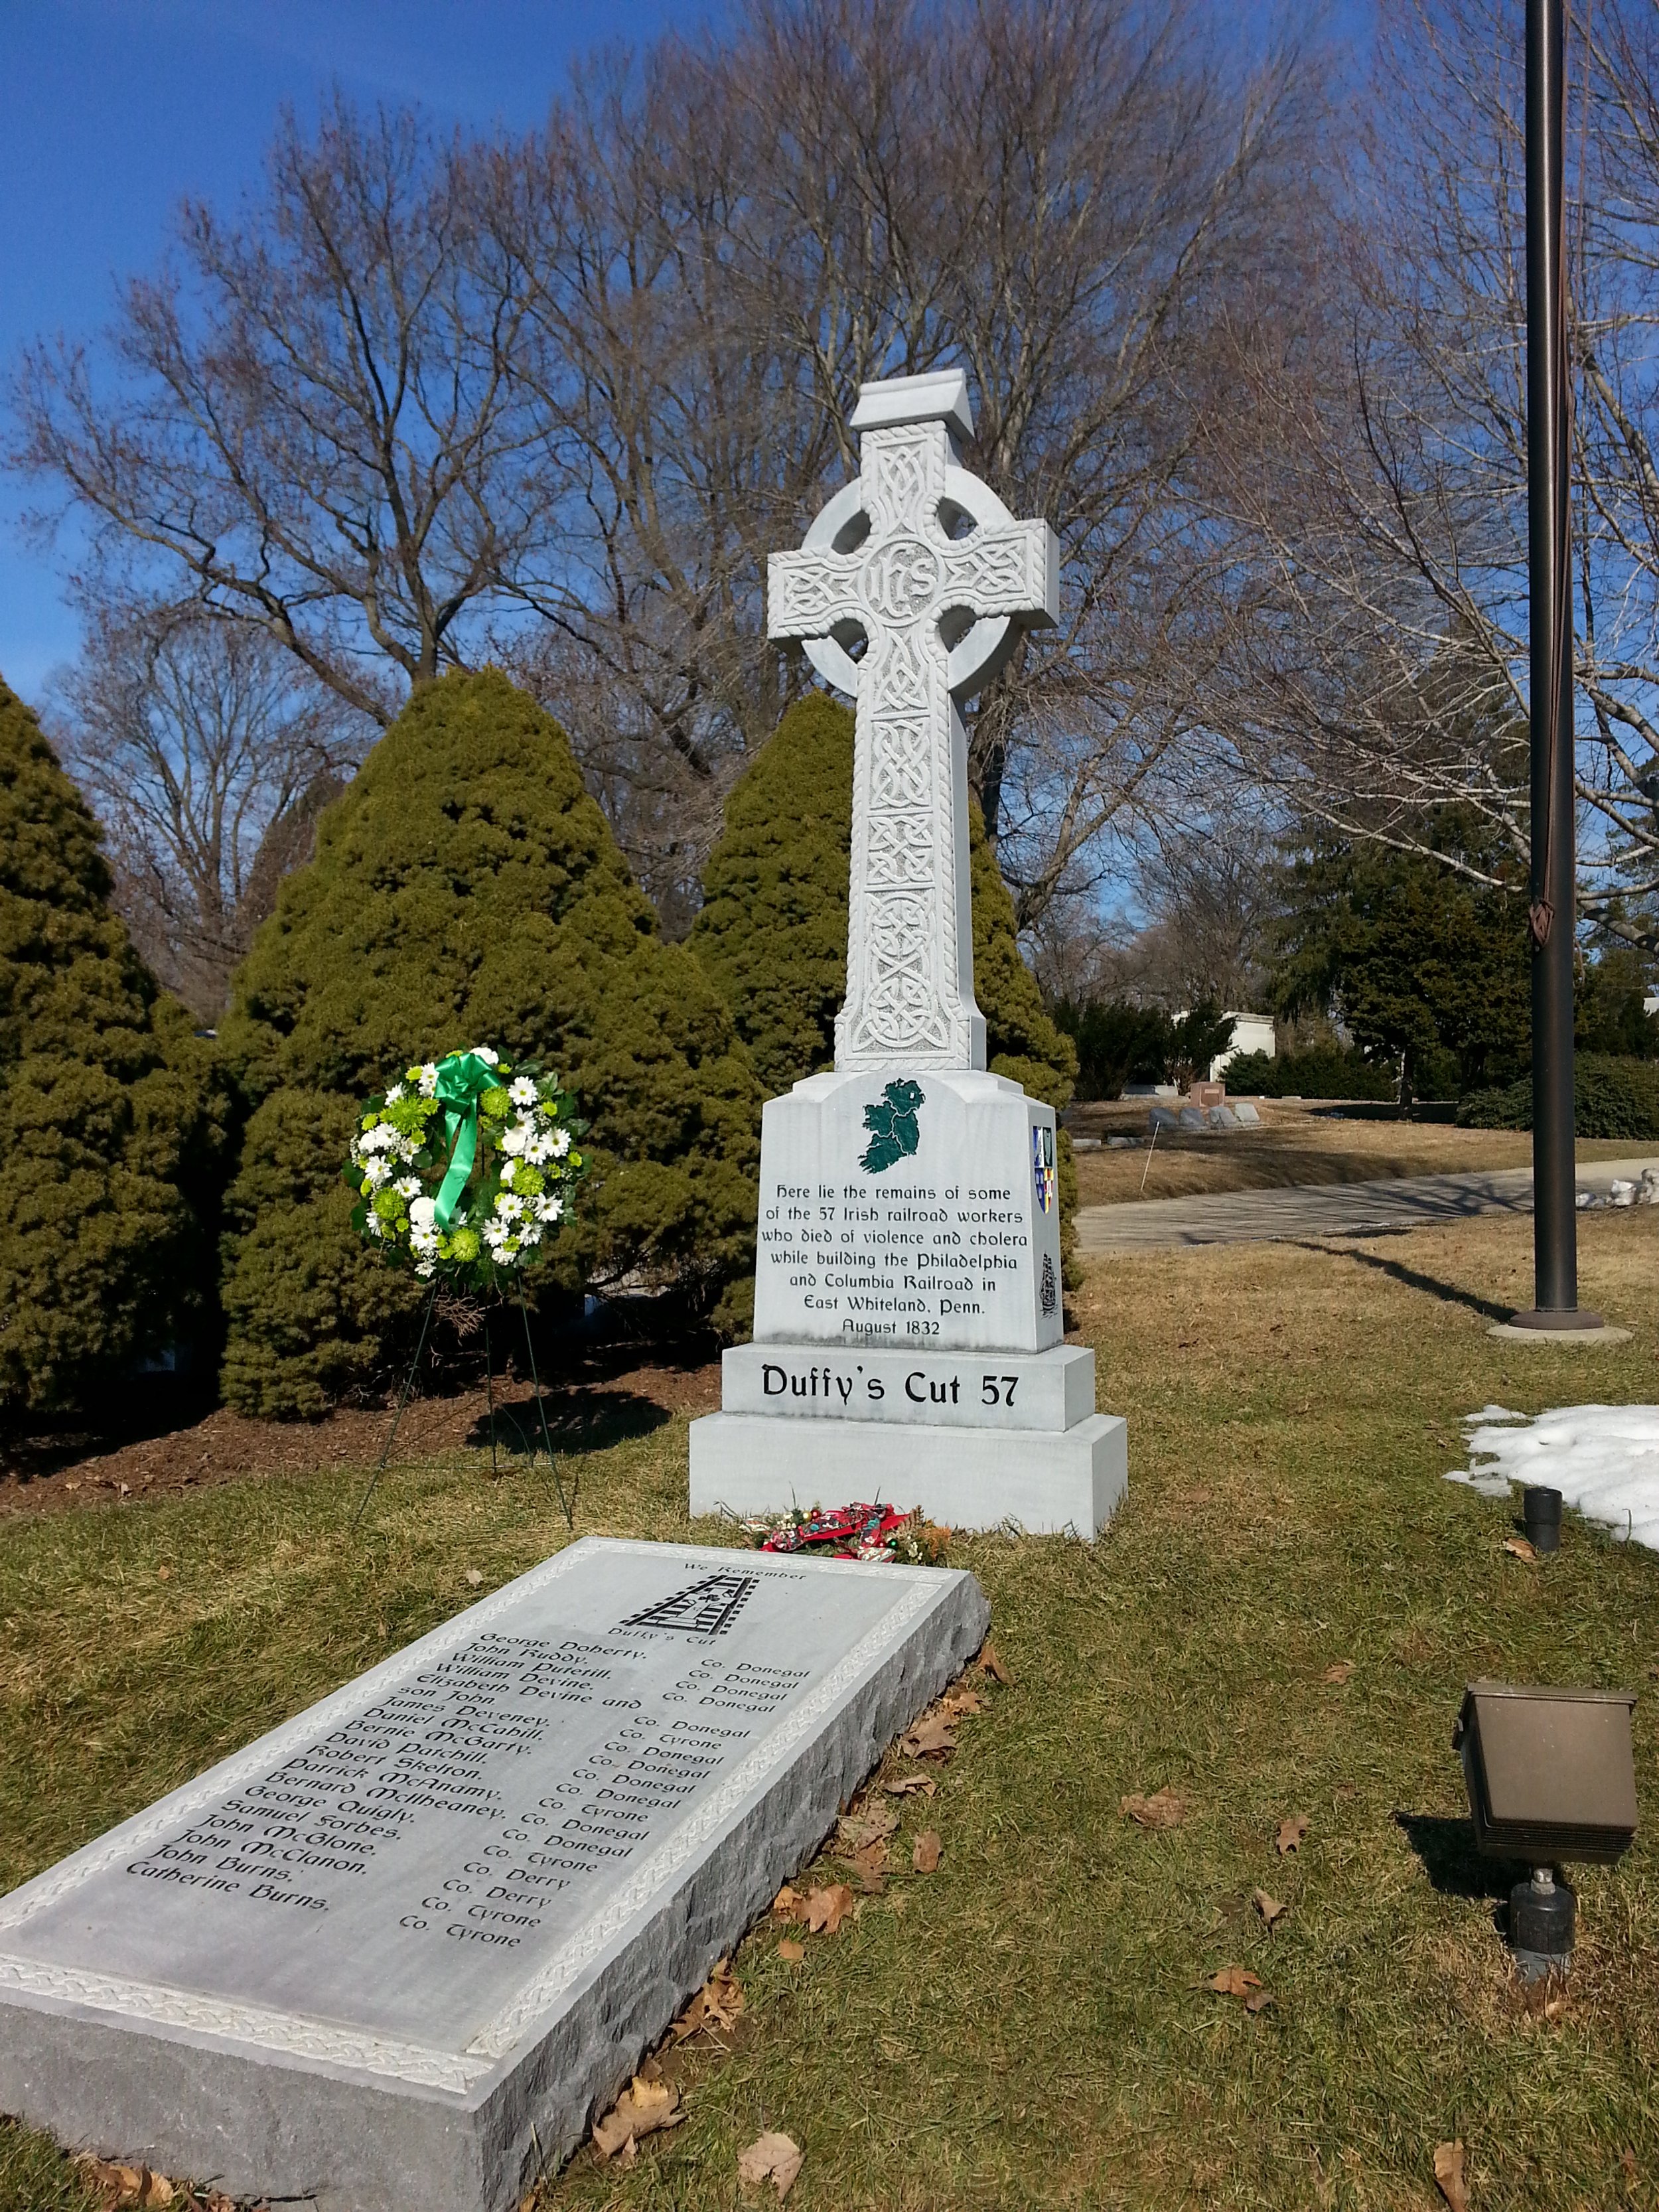  The Duffy's Cut burial site and memorial at West Laurel Hill Cemetery in Bala Cynwyd, PA 